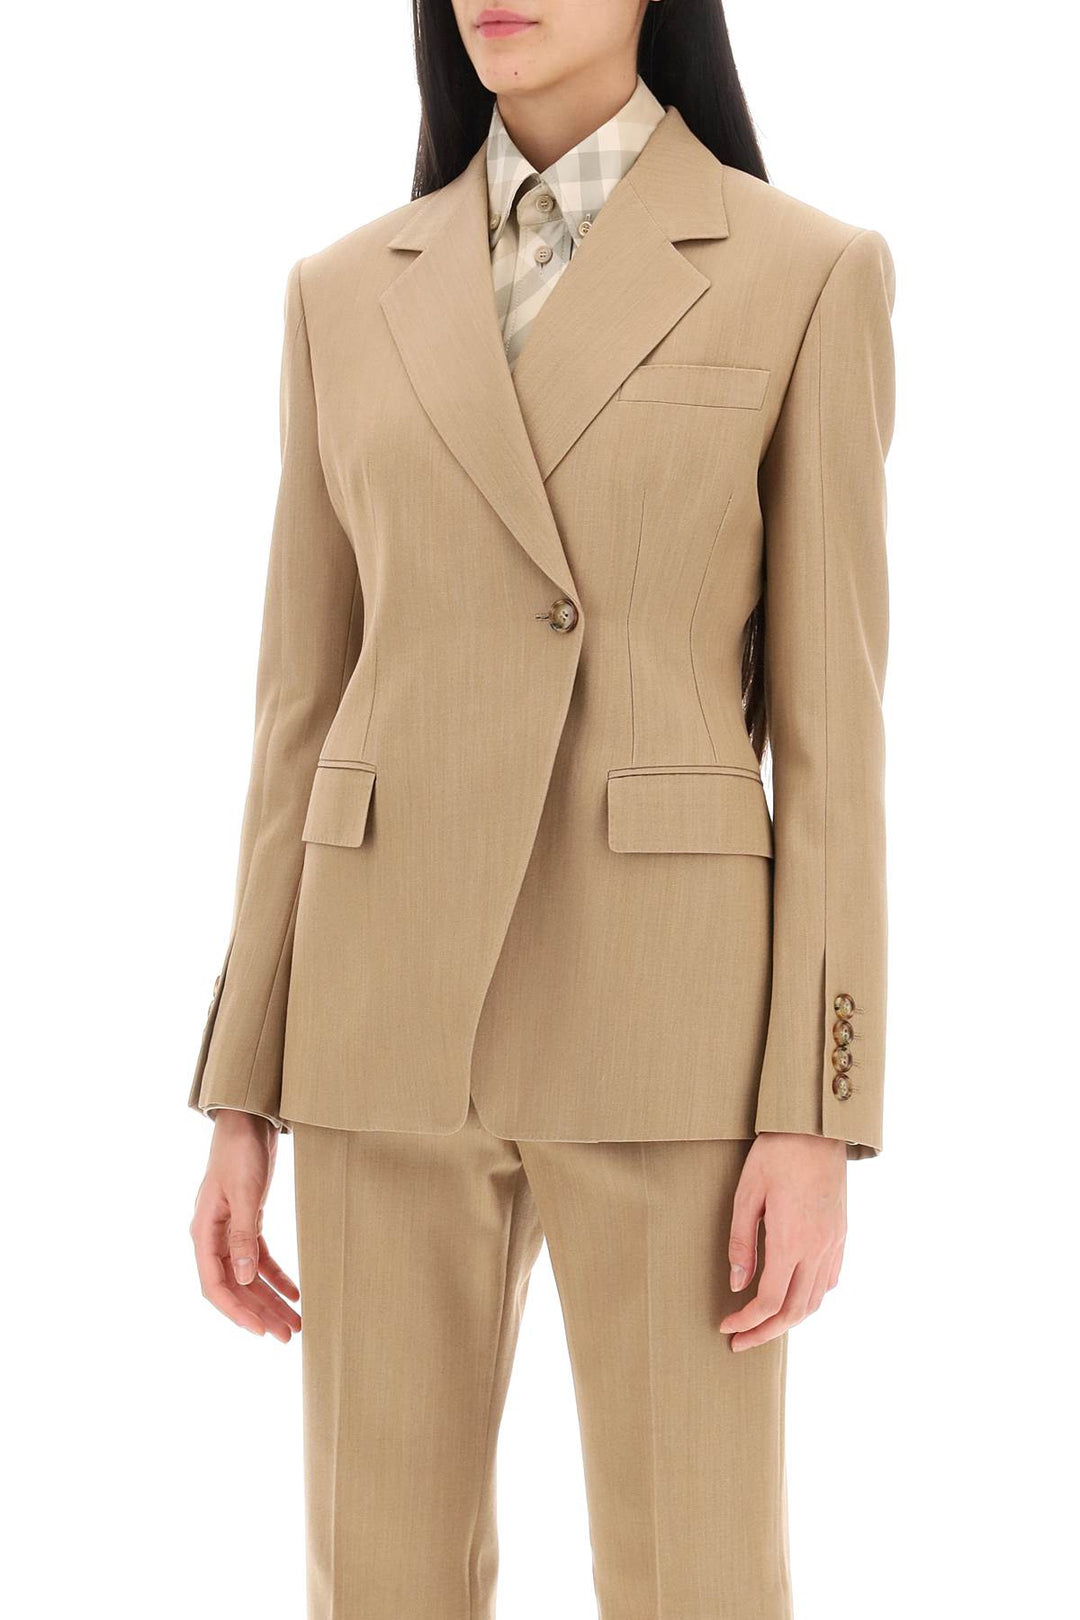 Burberry Claudete Double Breasted Jacket   Beige